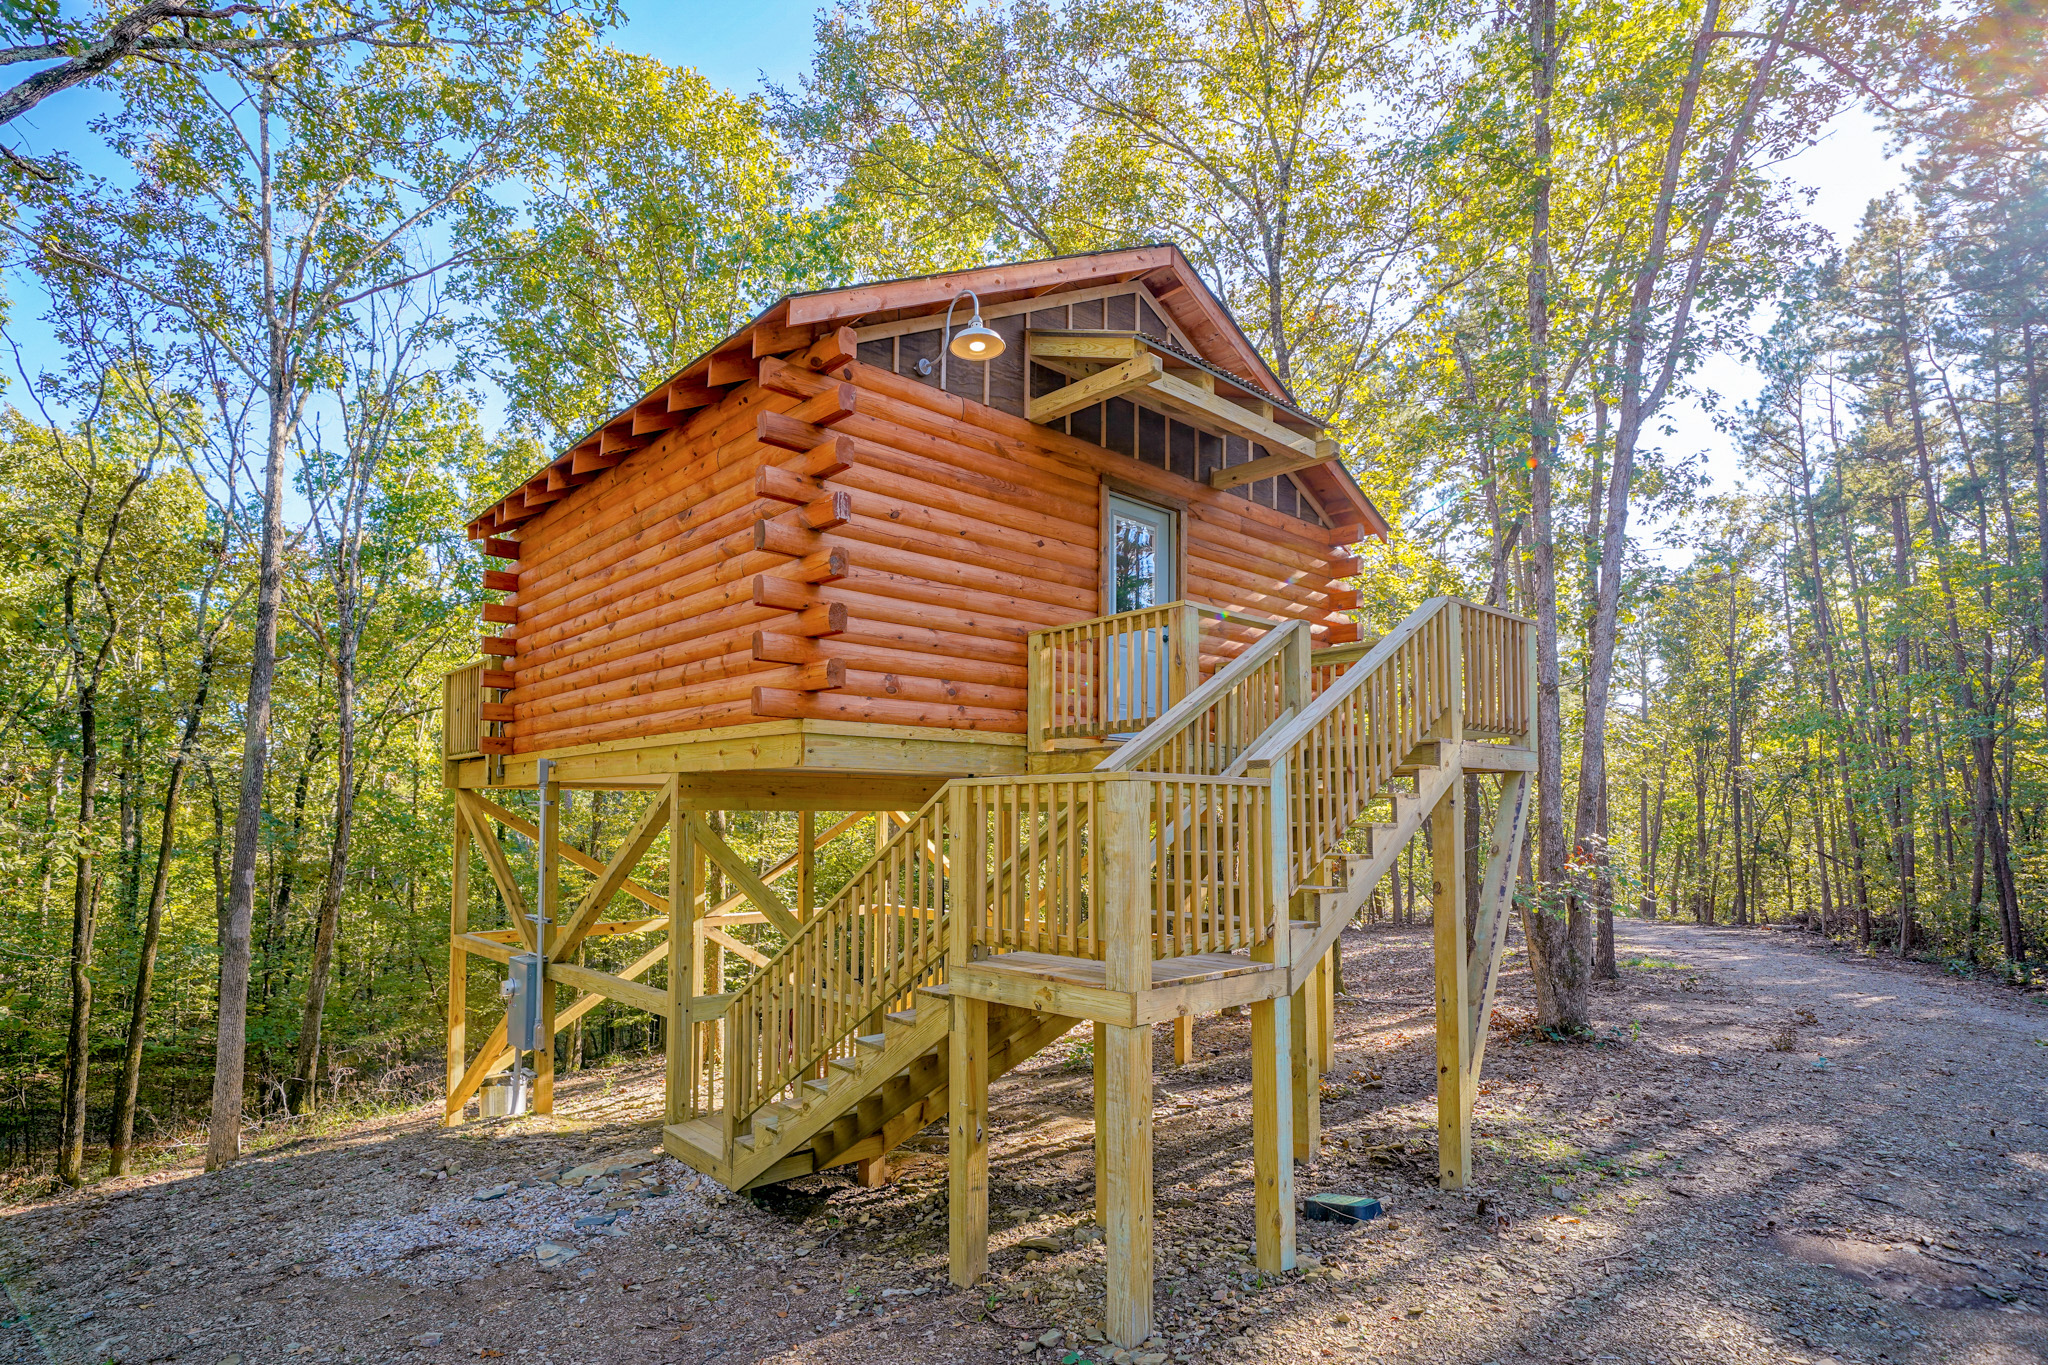 Traditional log cabin treehouse situated in the woods.